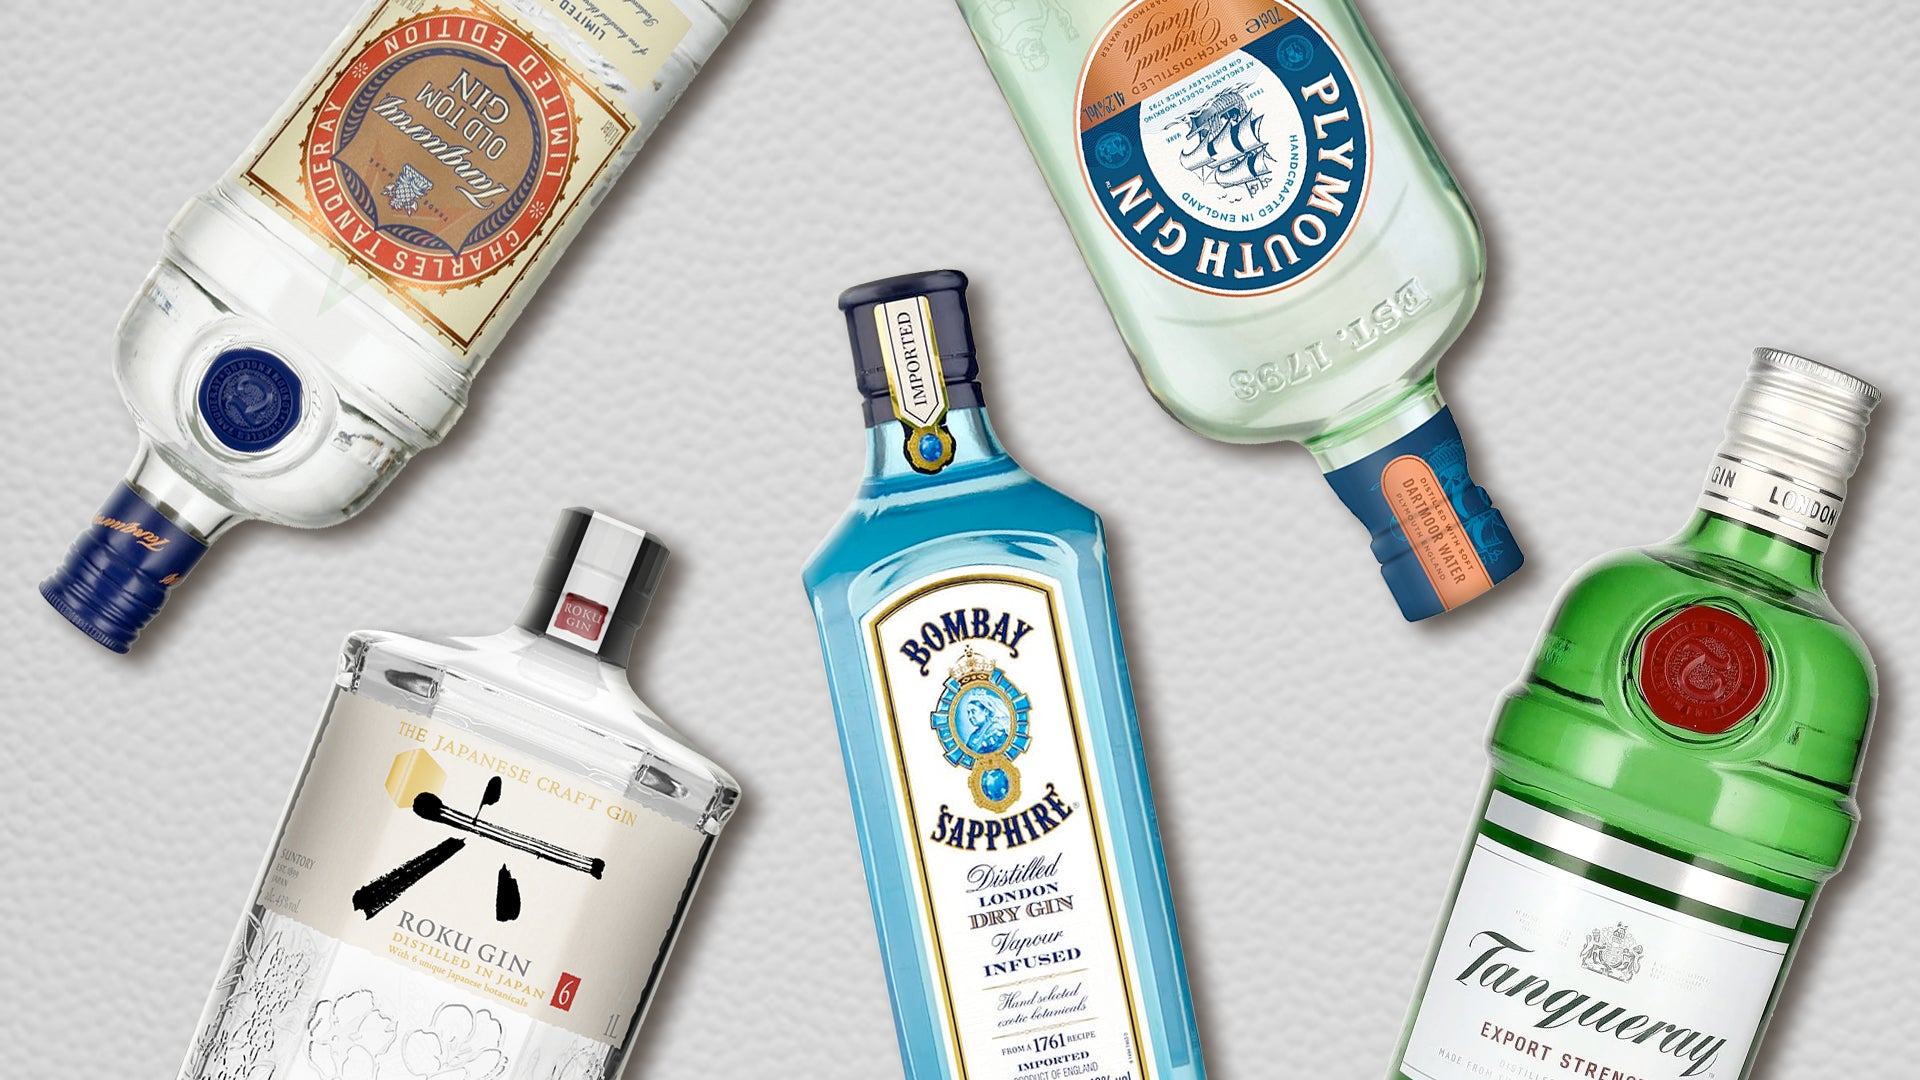 Types of Gin: A Guide Most Varieties the Popular to